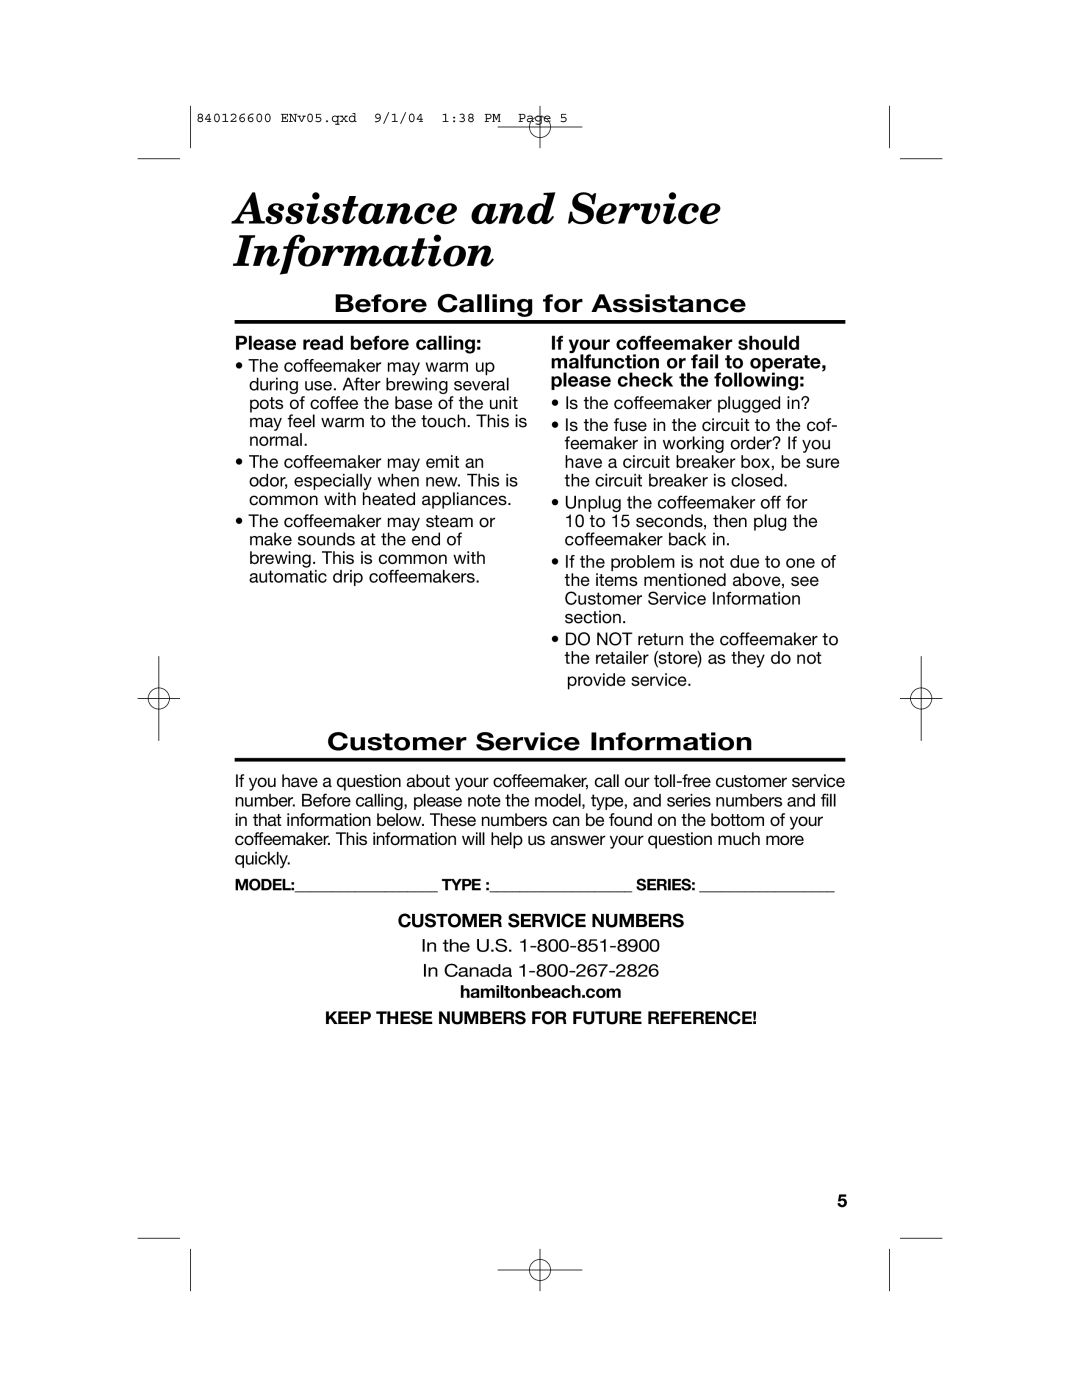 Hamilton Beach 80674 manual Assistance and Service Information, Before Calling for Assistance, Customer Service Information 